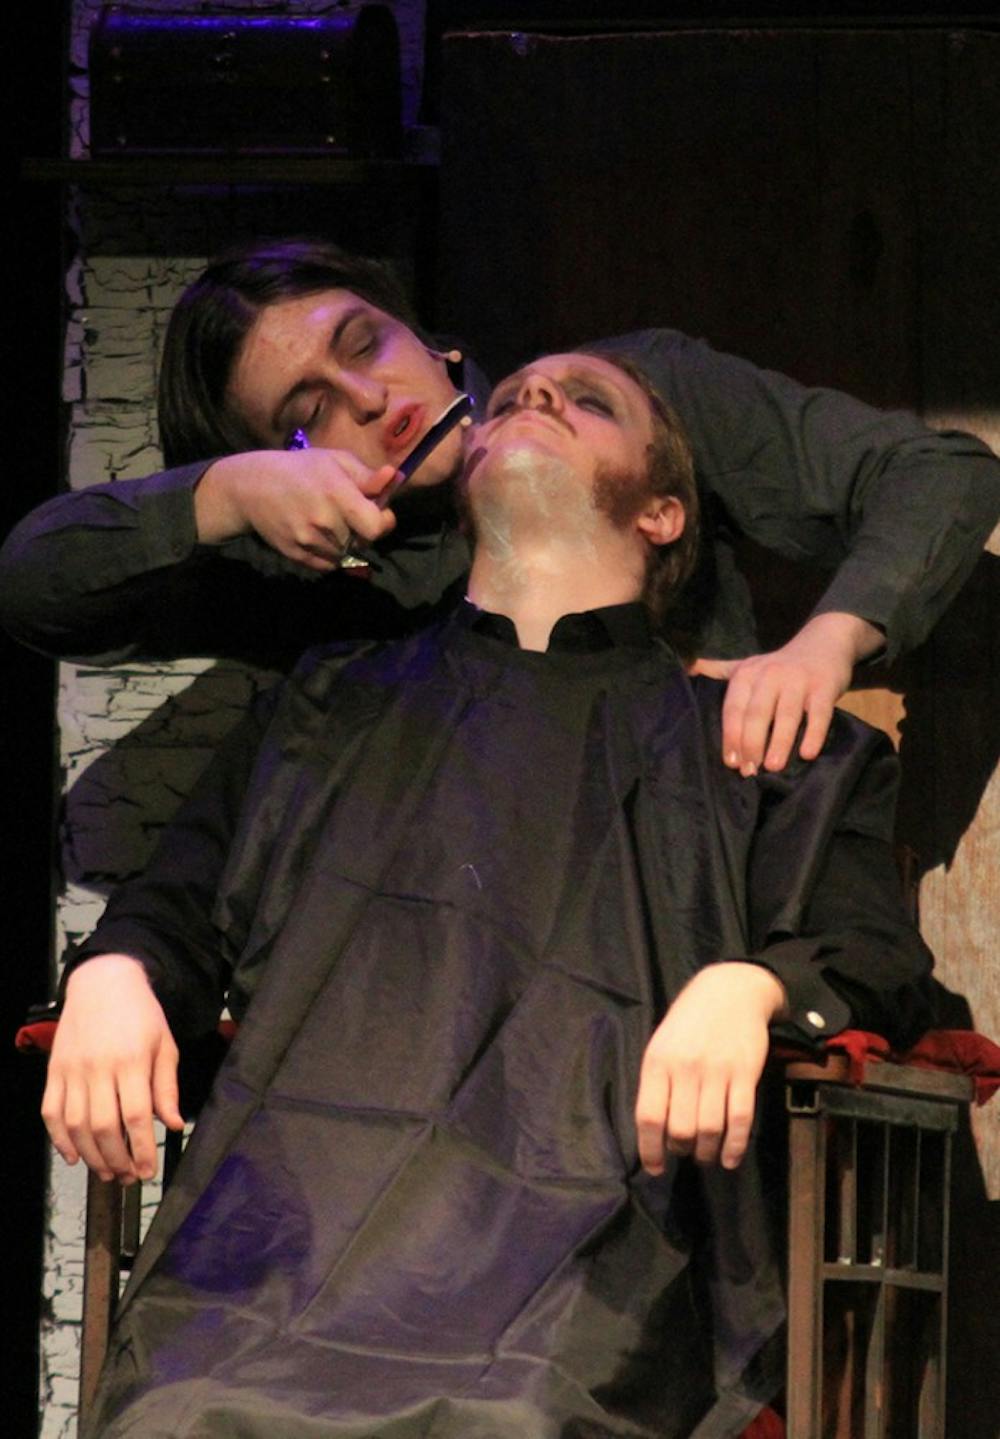 UNC Paupers Players are putting on a production of "Sweeney Todd" this Friday, Saturday, Sunday, and Monday nights at the Historic Playmakers Theater. Student tickets are $5 and tickets for the public are $10.